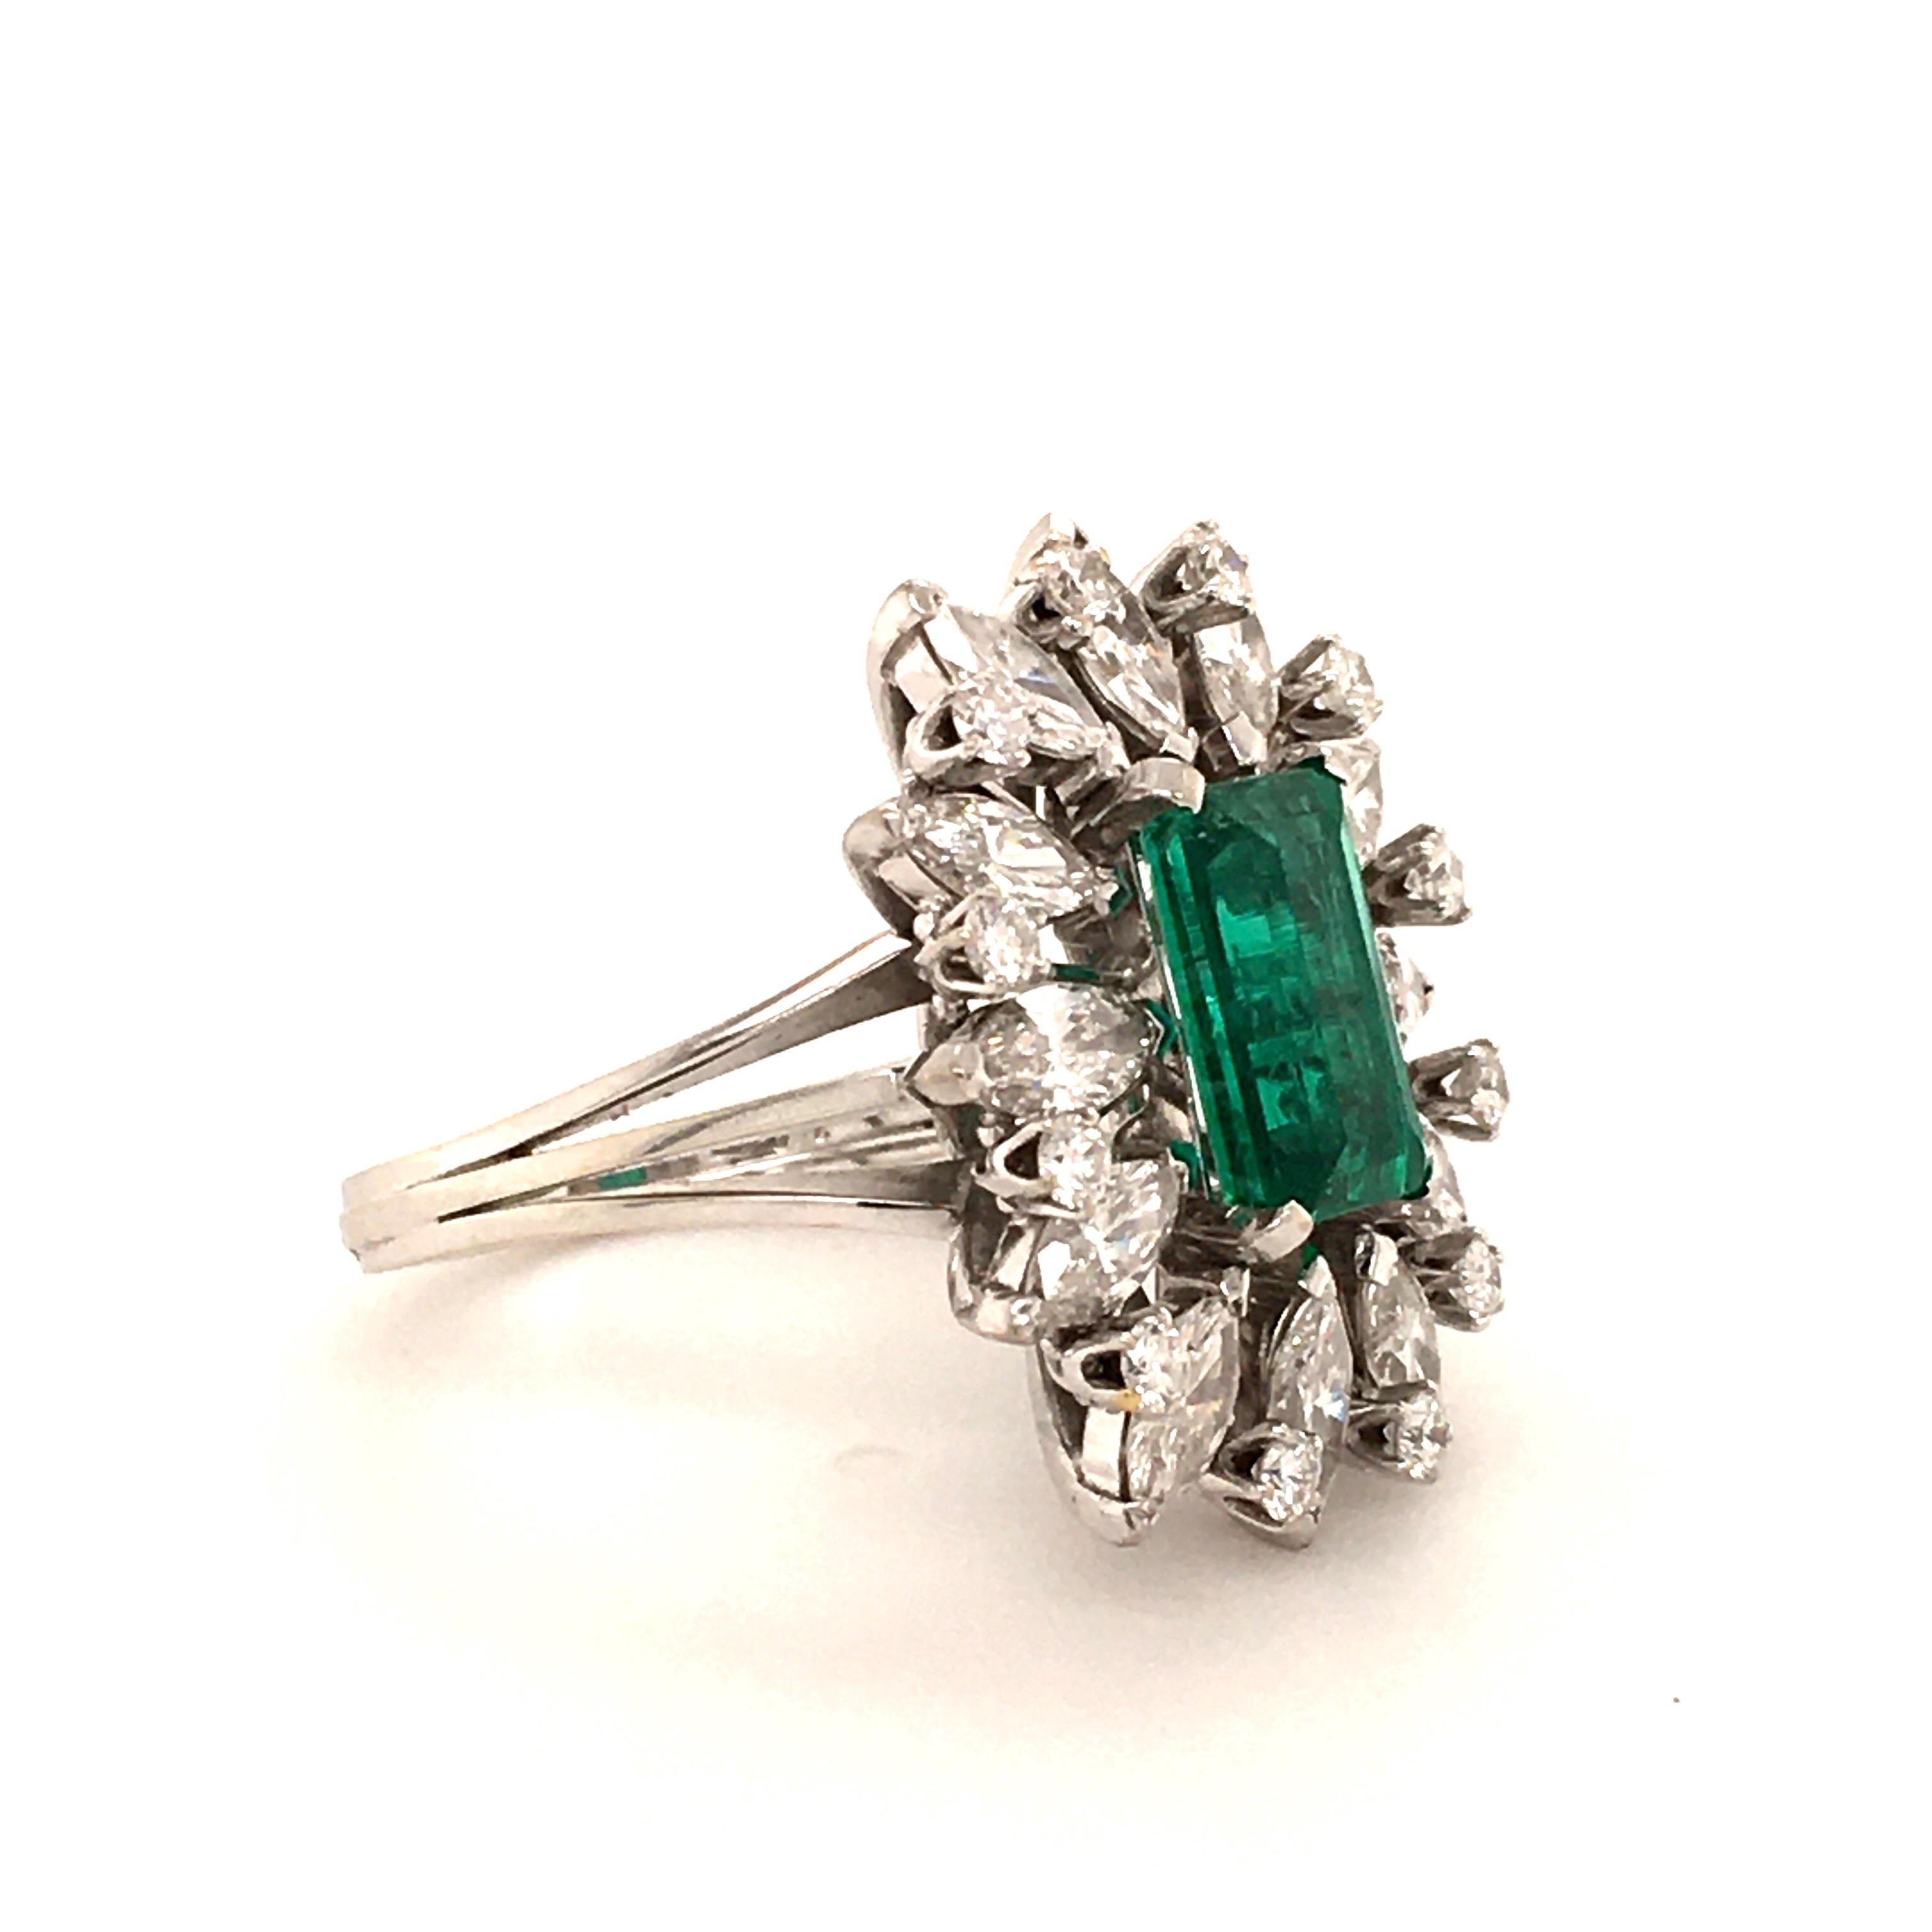 2.25 Carat Colombian Emerald and Diamond Ring in 18 Karat White Gold 2